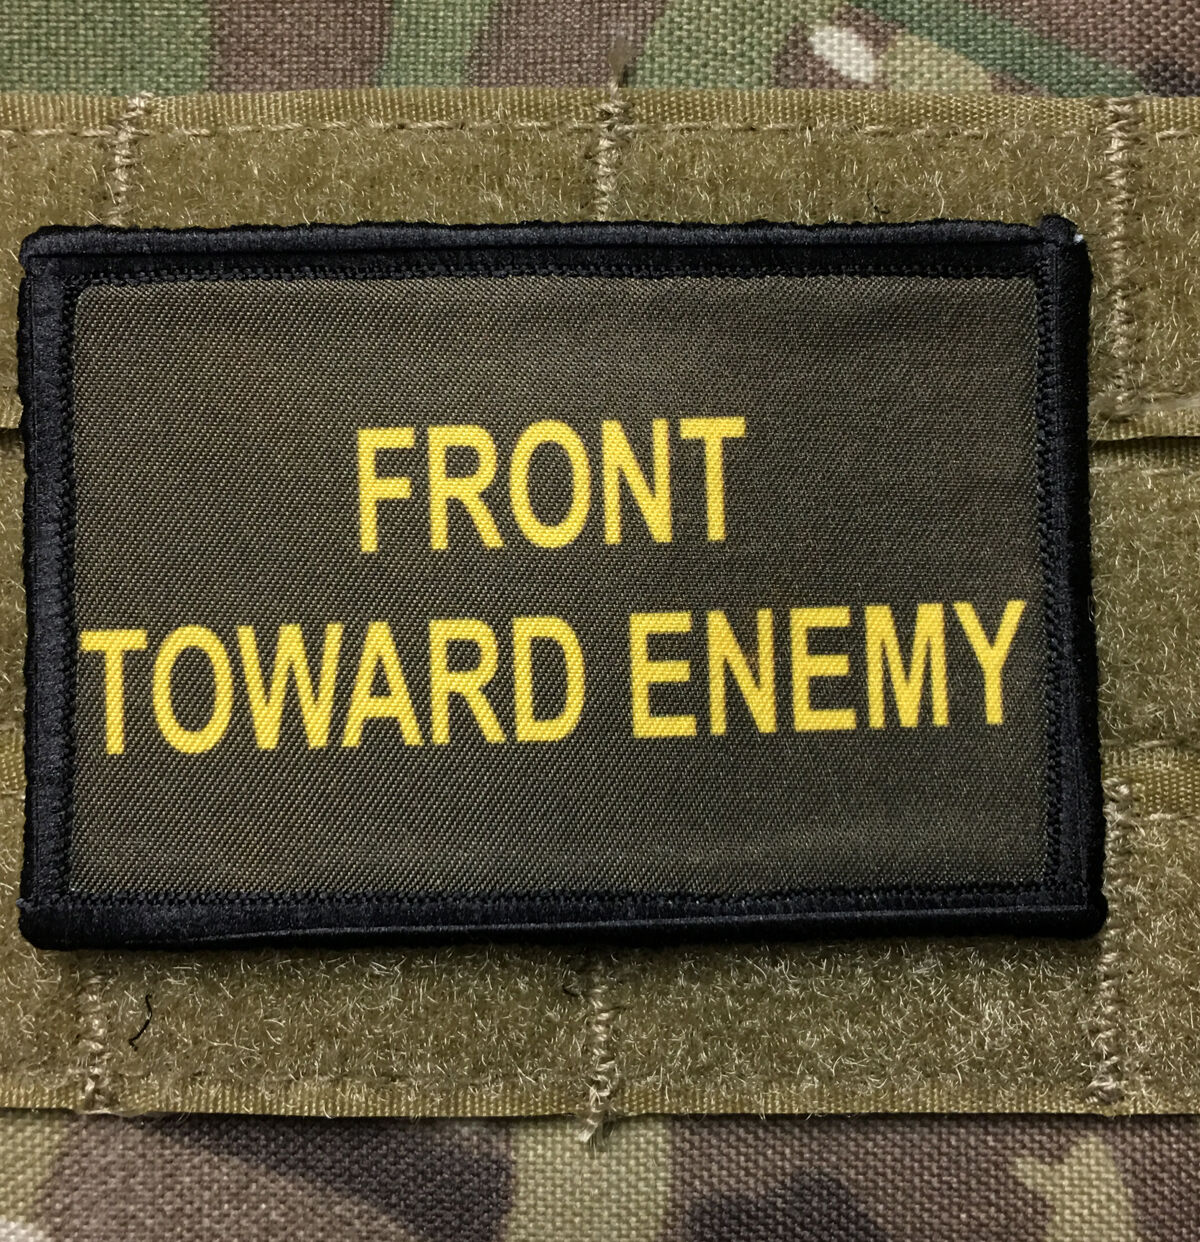 Front Toward Enemy Claymore Morale Patch Tactical Military Army Badge Hook Flag